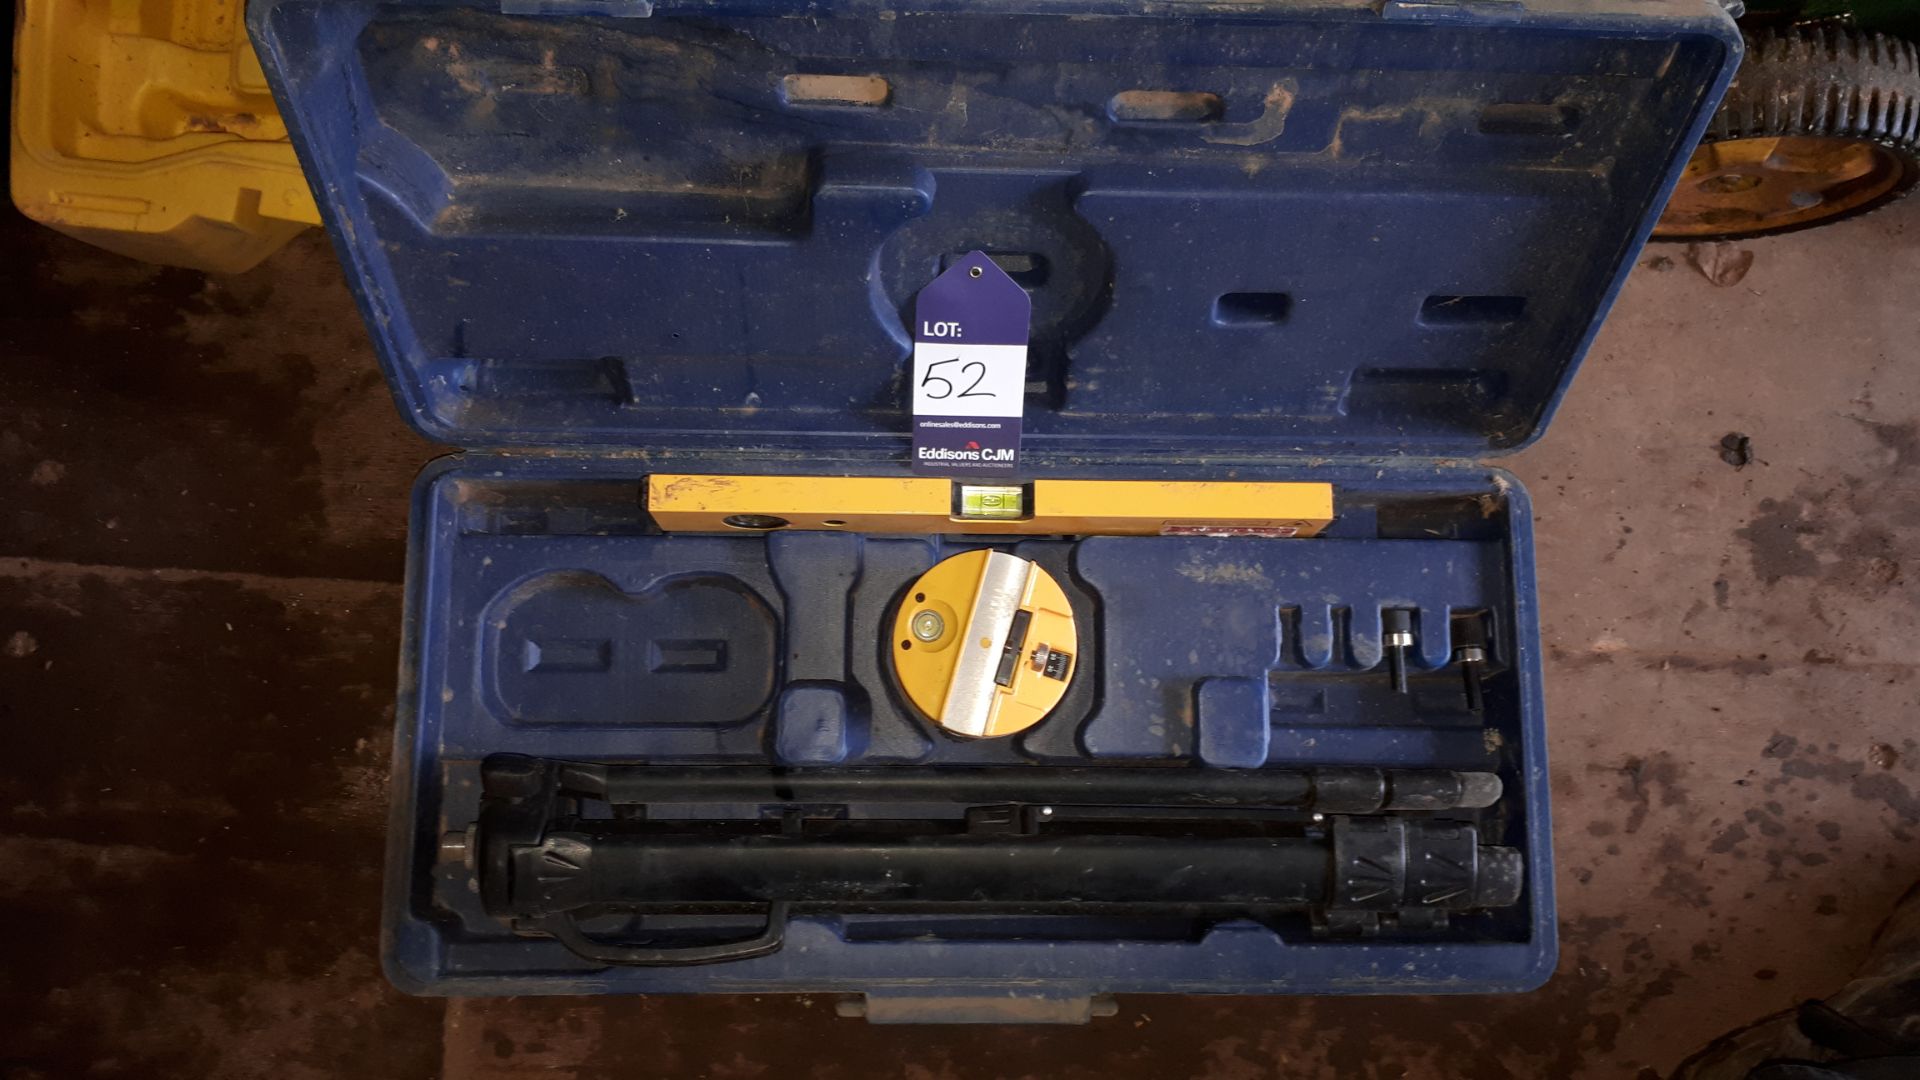 Assortment of site surveying equipment, including Leica Rugby 610 laser, Power Master laser level - Bild 2 aus 4